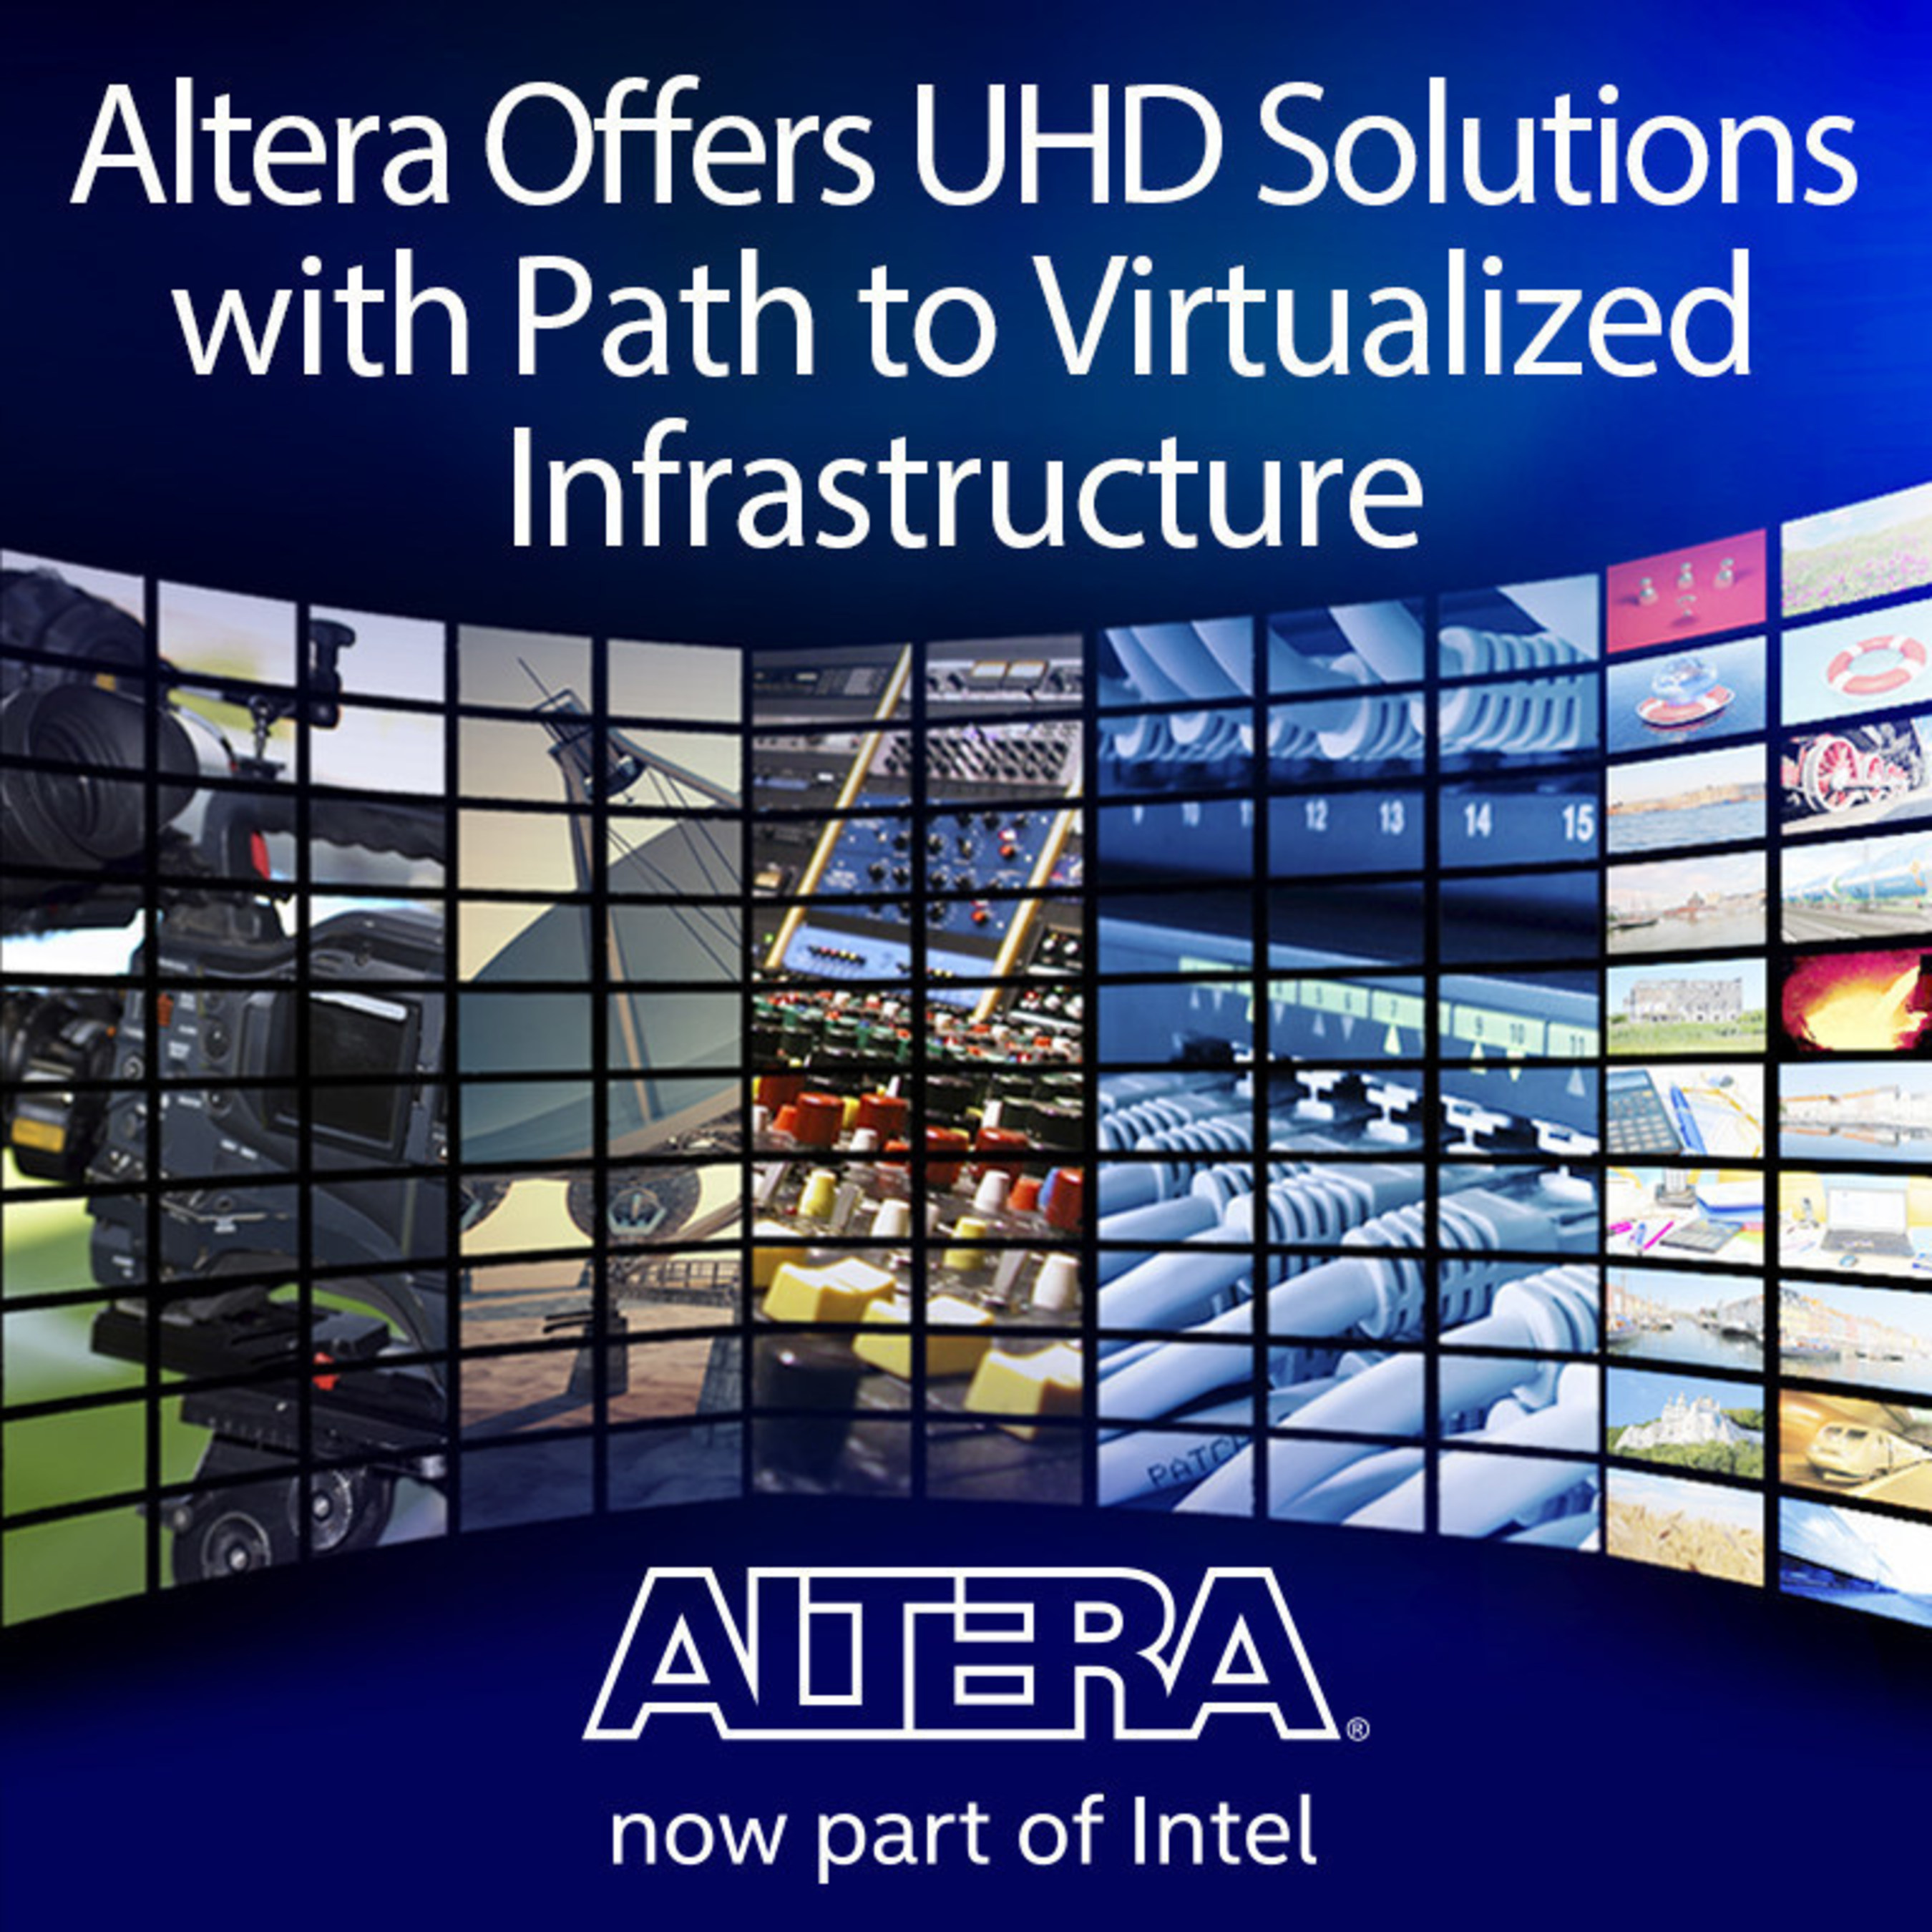 Altera FPGAs, such as Arria(R) 10 and Stratix(R) with its video IP, provide the solutions that enable broadcasters to tackle the challenges of Ultra High Definition (UHD) technology. At NAB, designers of broadcast systems can learn more about how Altera FPGAs and the Intel(R) Xeon(R) Processor E5 v4 family can enable the ecosystem for the future.